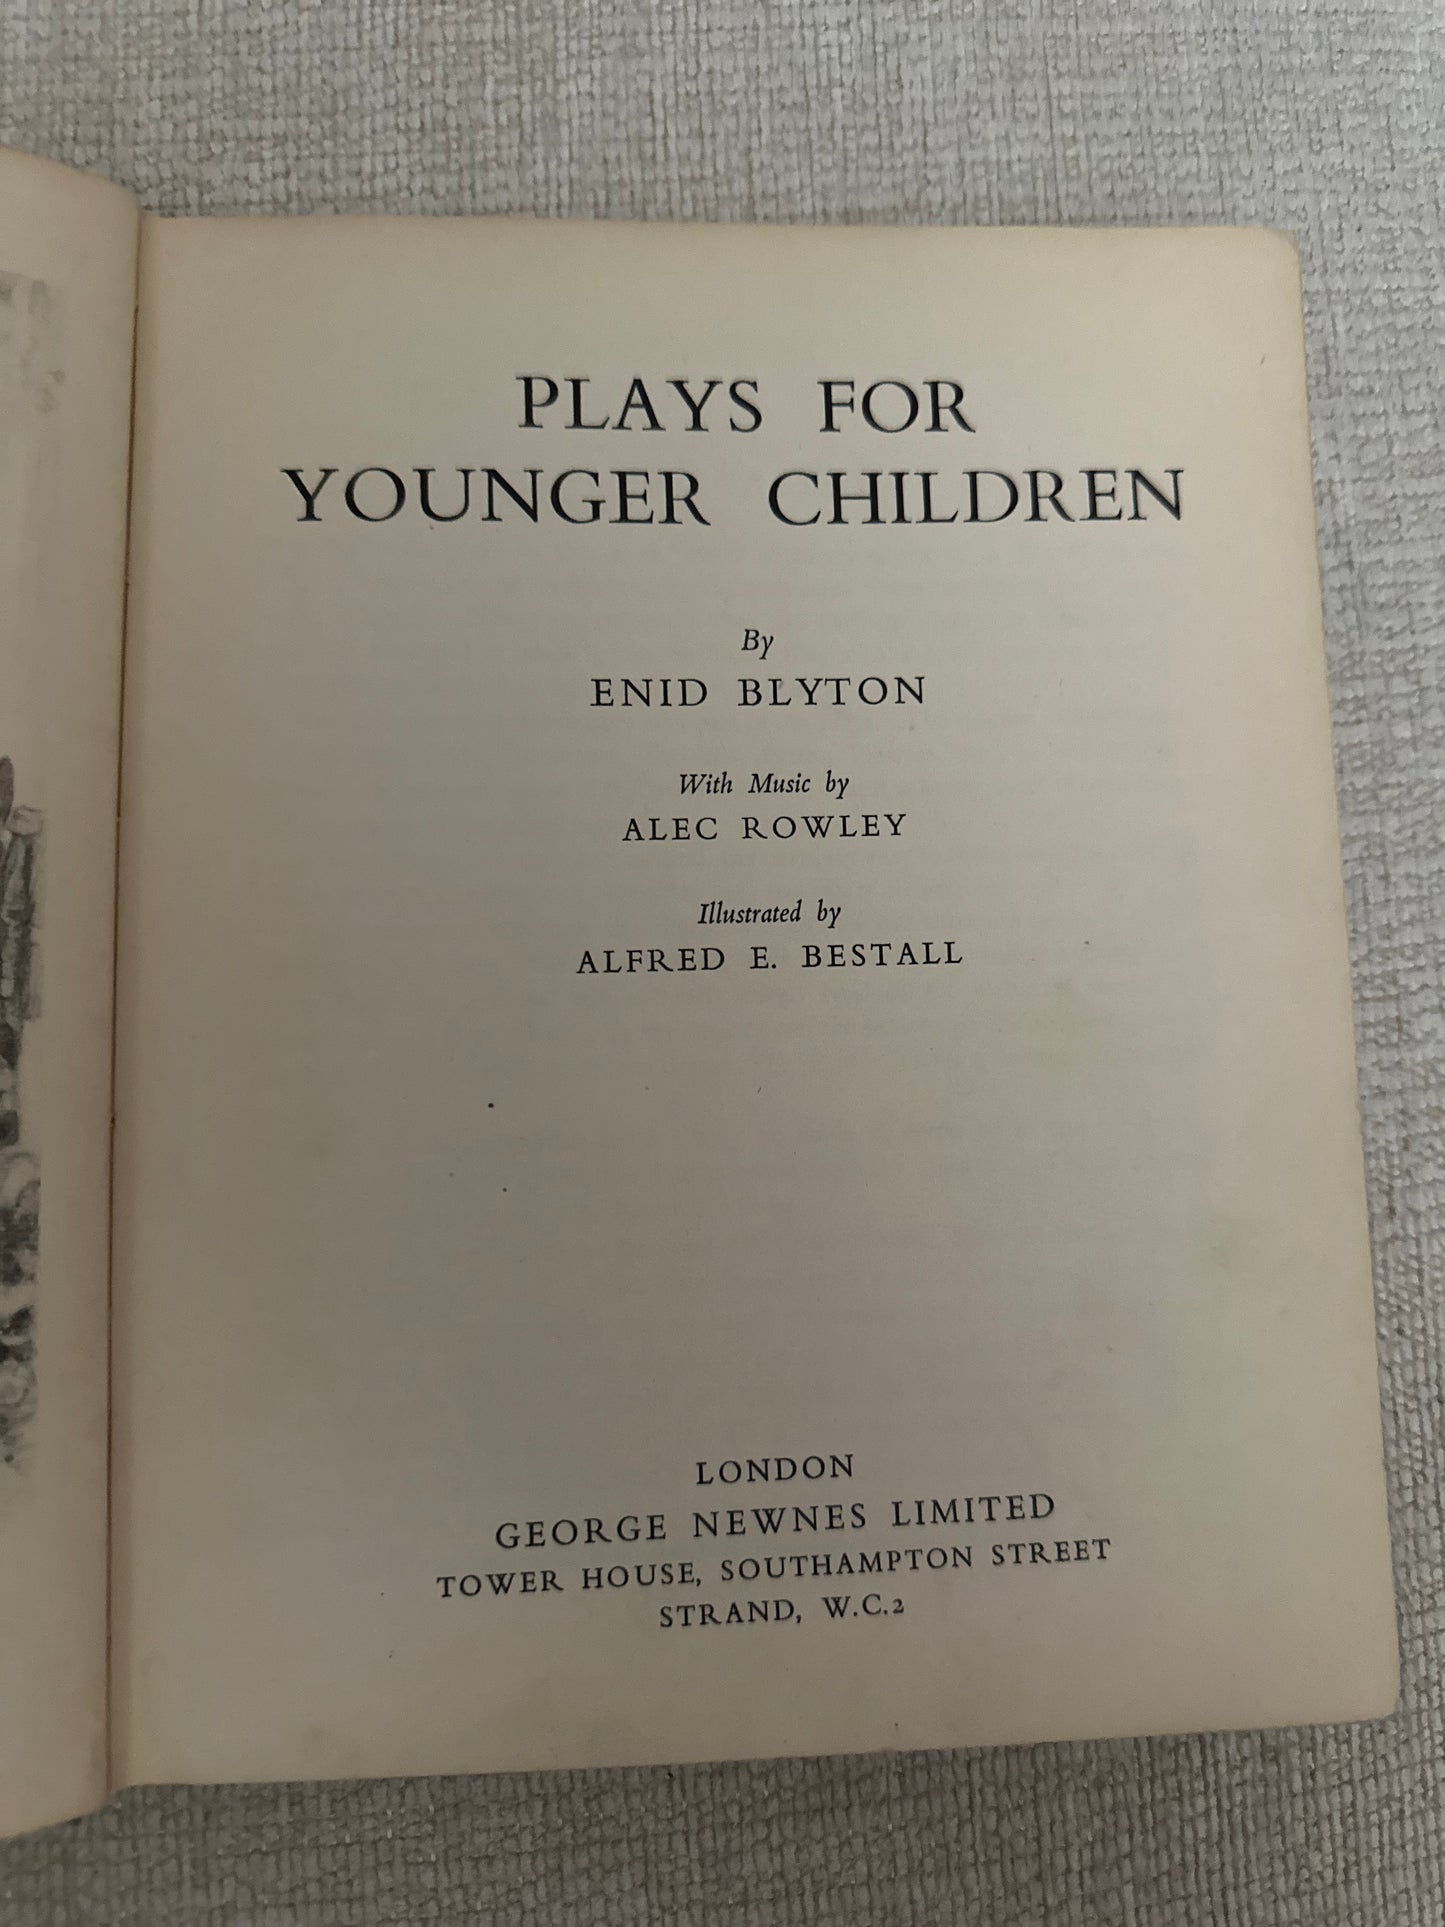 1940*1st* Plays For Younger Children - Enid Blyton(Alfred Bestall Illust) Alec Rowley music. George Newnes Ltd